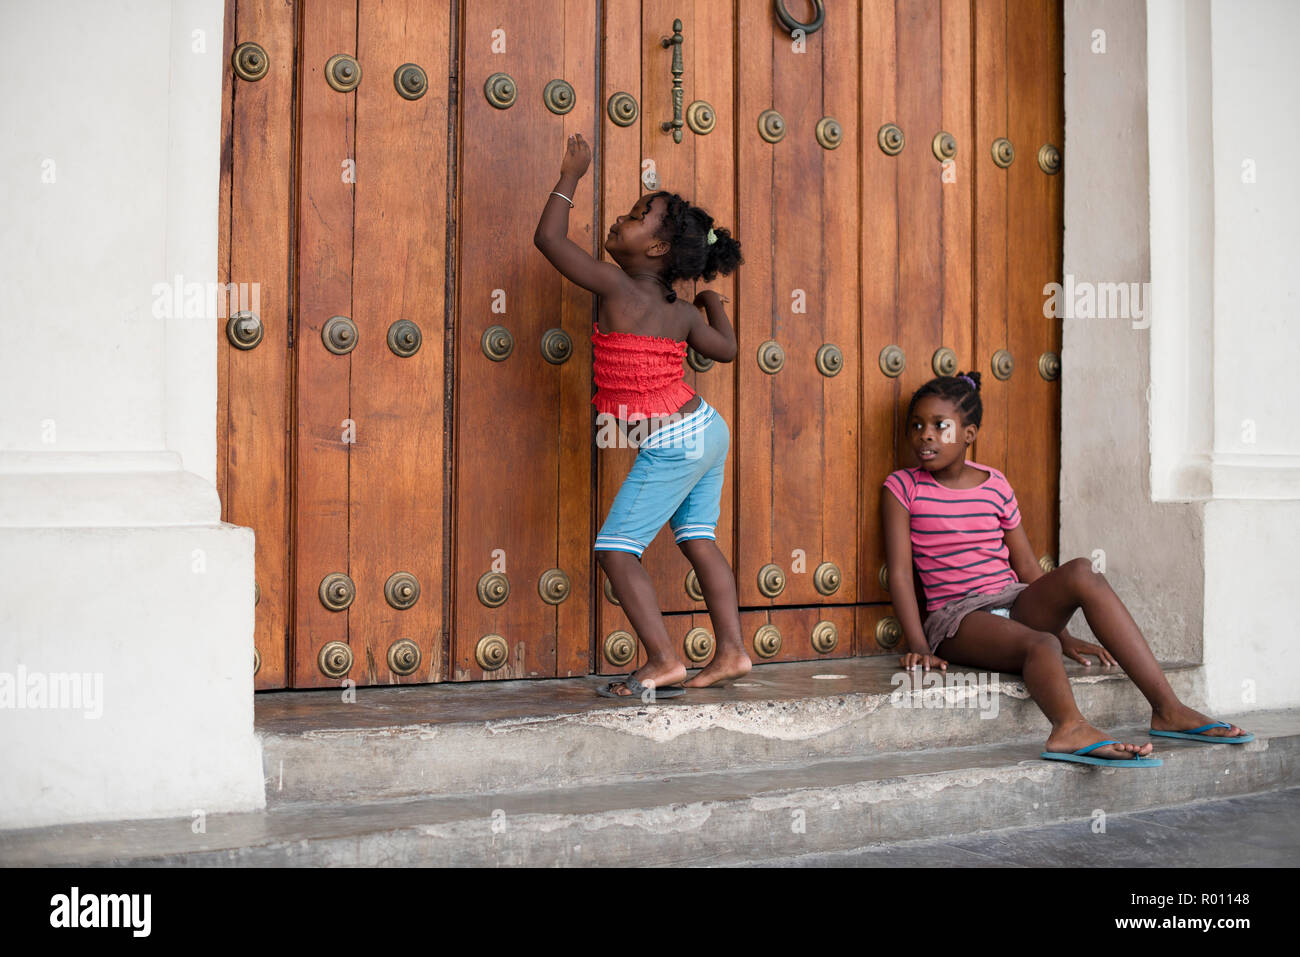 Some silly girls pose for the camera in a plaza in Havana, Cuba. Stock Photo